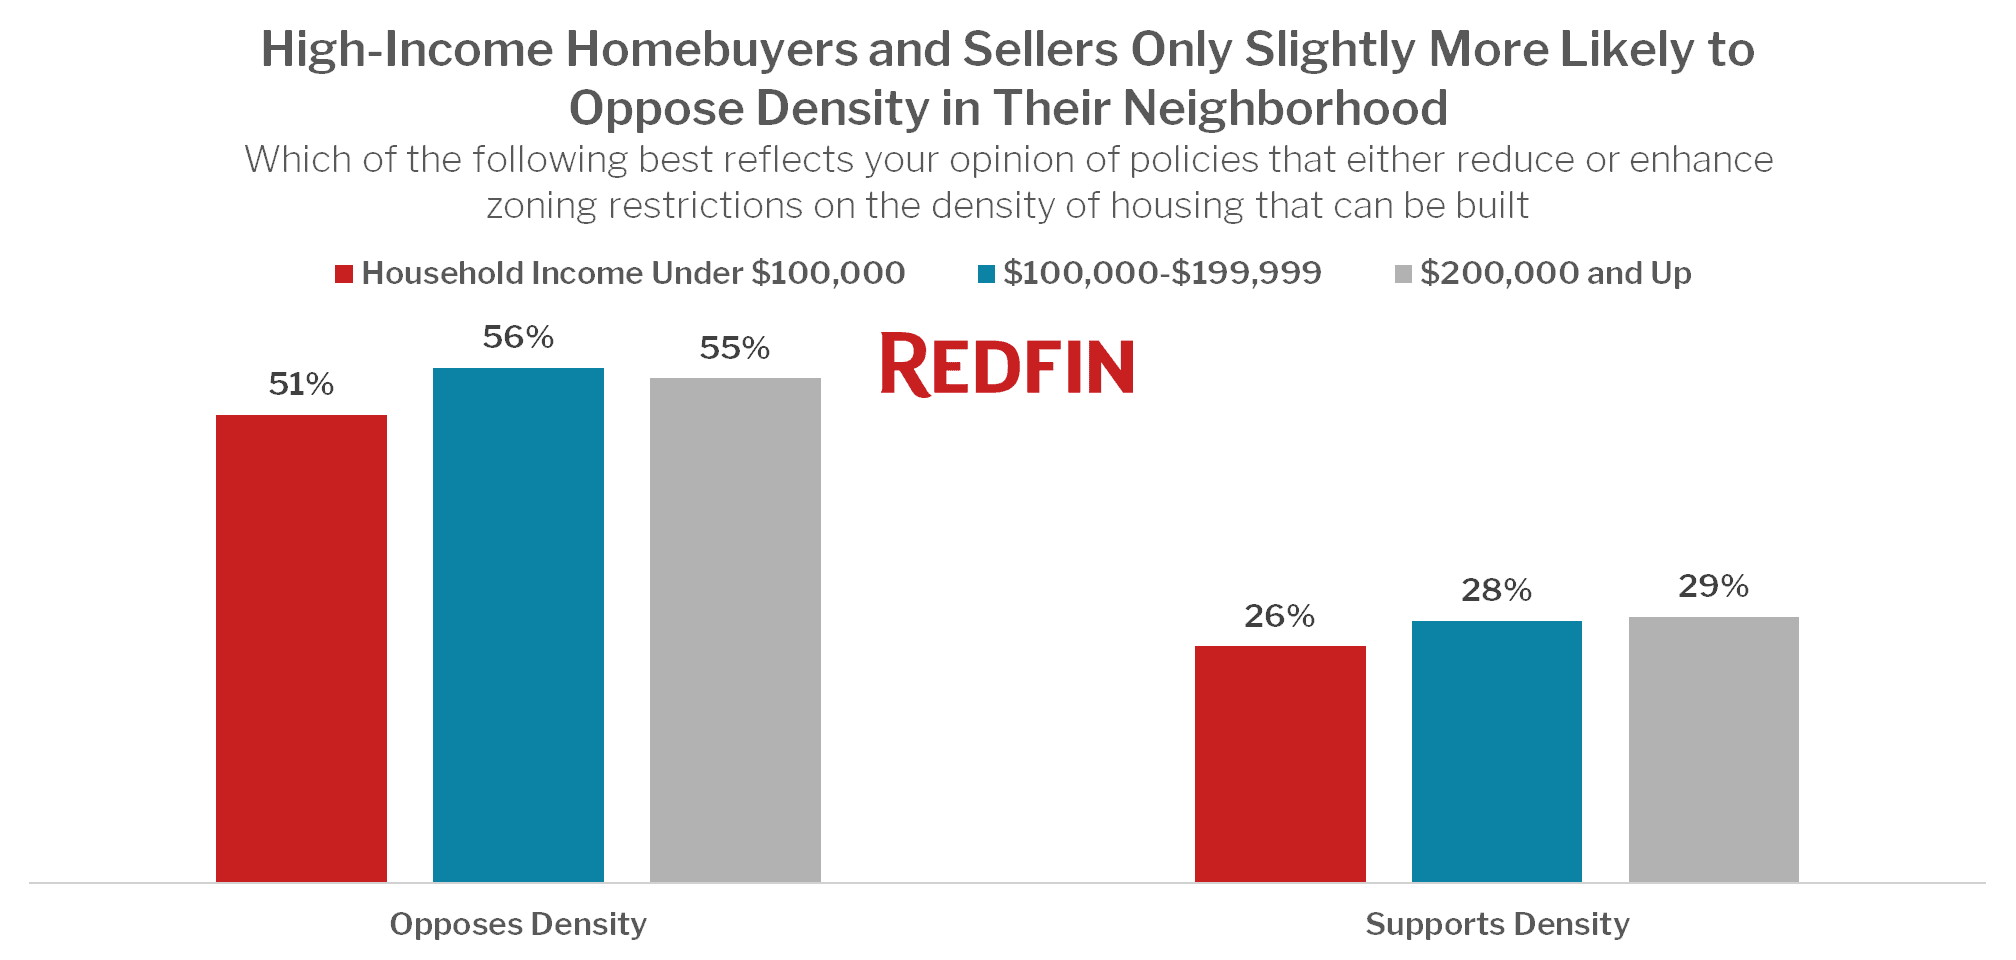 High-Income Homebuyers and Sellers Only Slightly More Likely to Oppose Density in Their Neighborhood